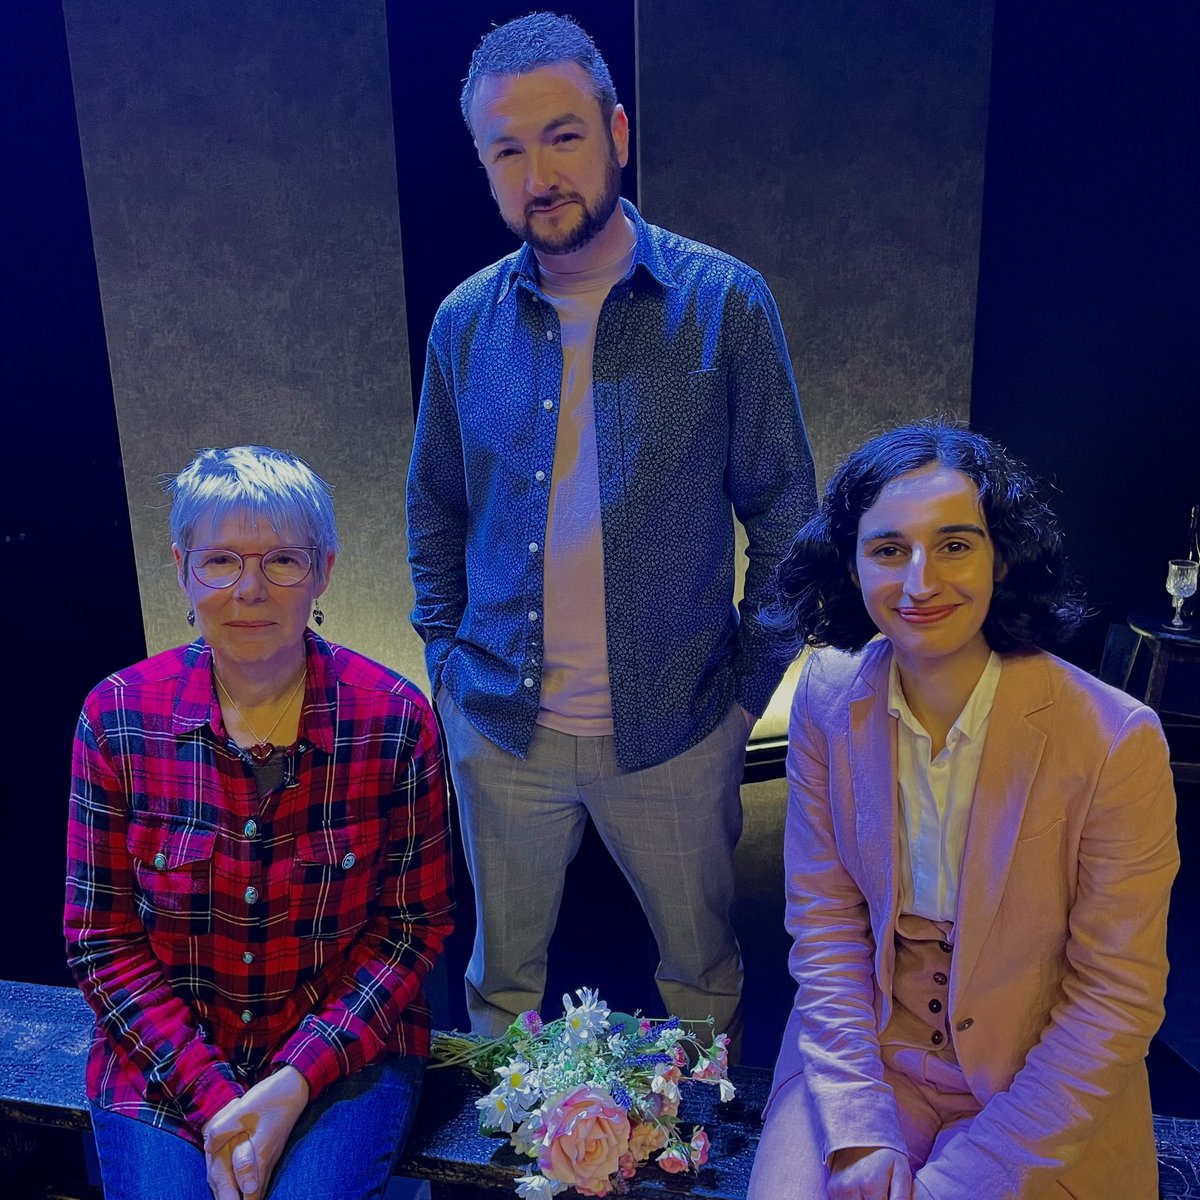 Tomorrow our episode with Rona Munro and @ashdouglasscot will be available to listen to wherever you get your podcasts. Huge thank you to @RAWMaterialArts and @captheatres and everyone on James V: Katherine